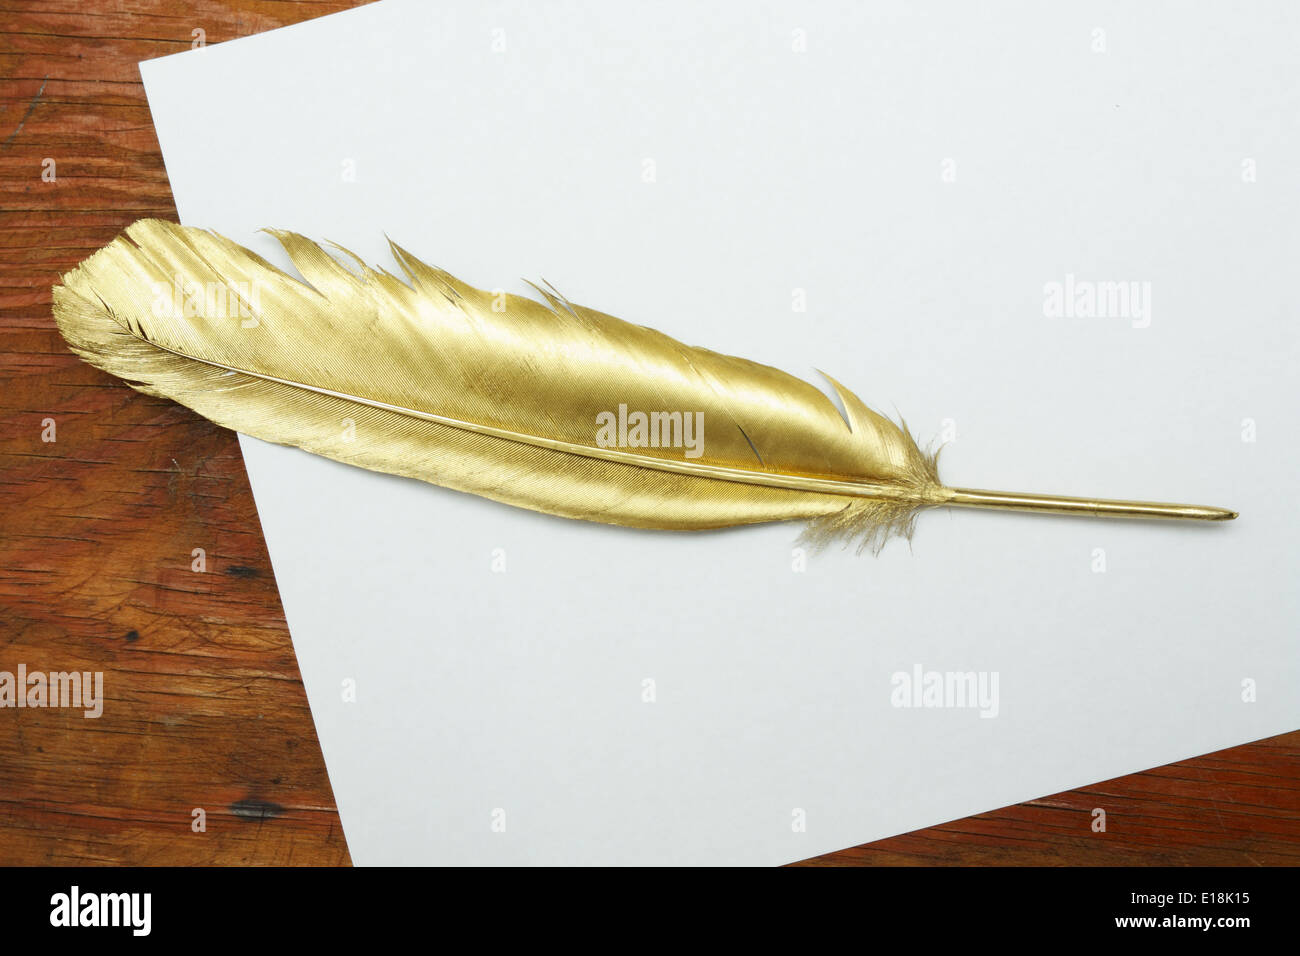 Gold quill pen on a white paper and wooden table Stock Photo